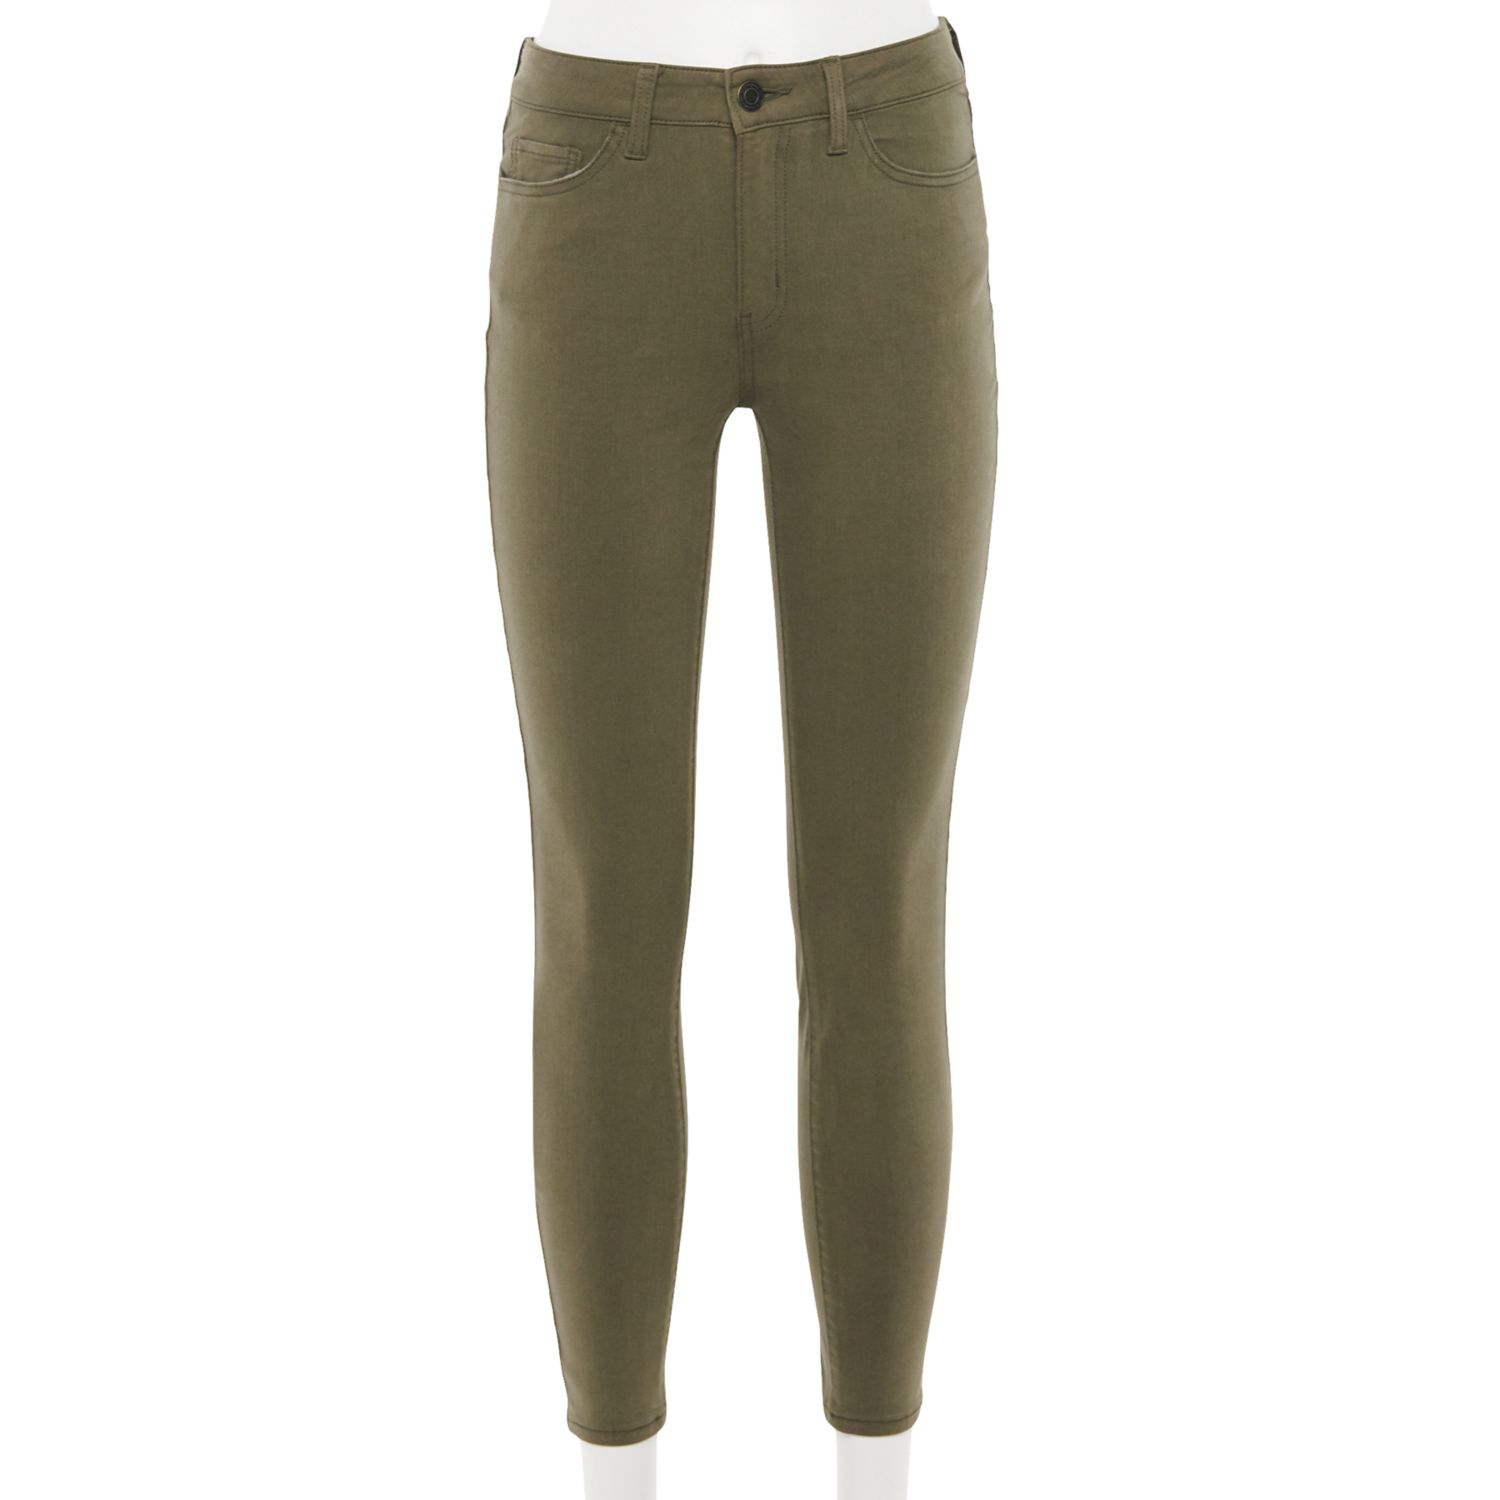 plus size olive green jeggings